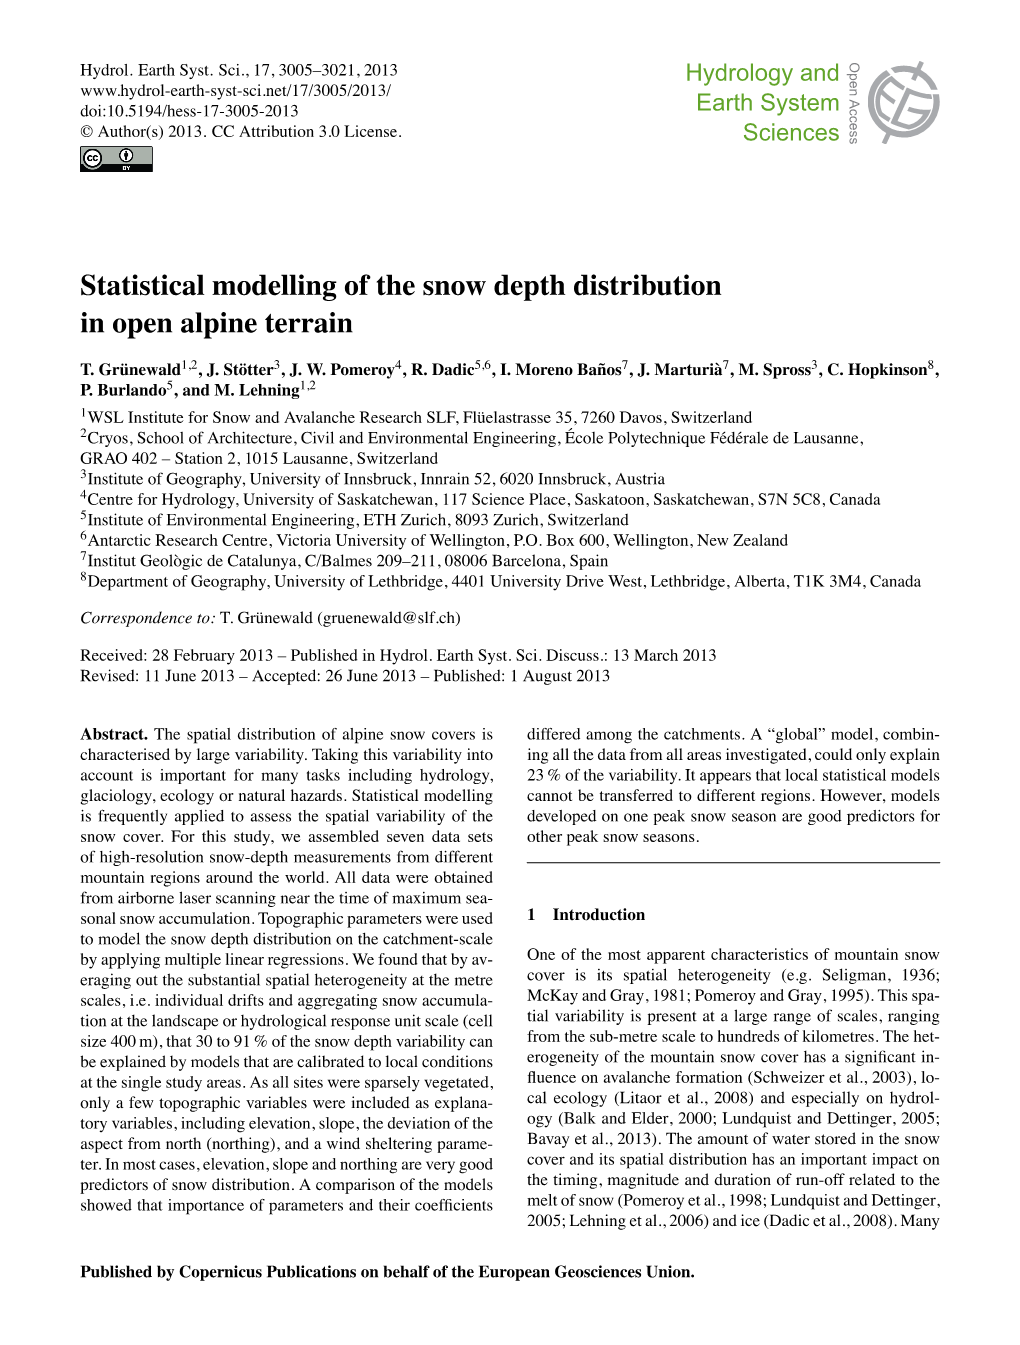 Statistical Modelling of the Snow Depth Distribution In